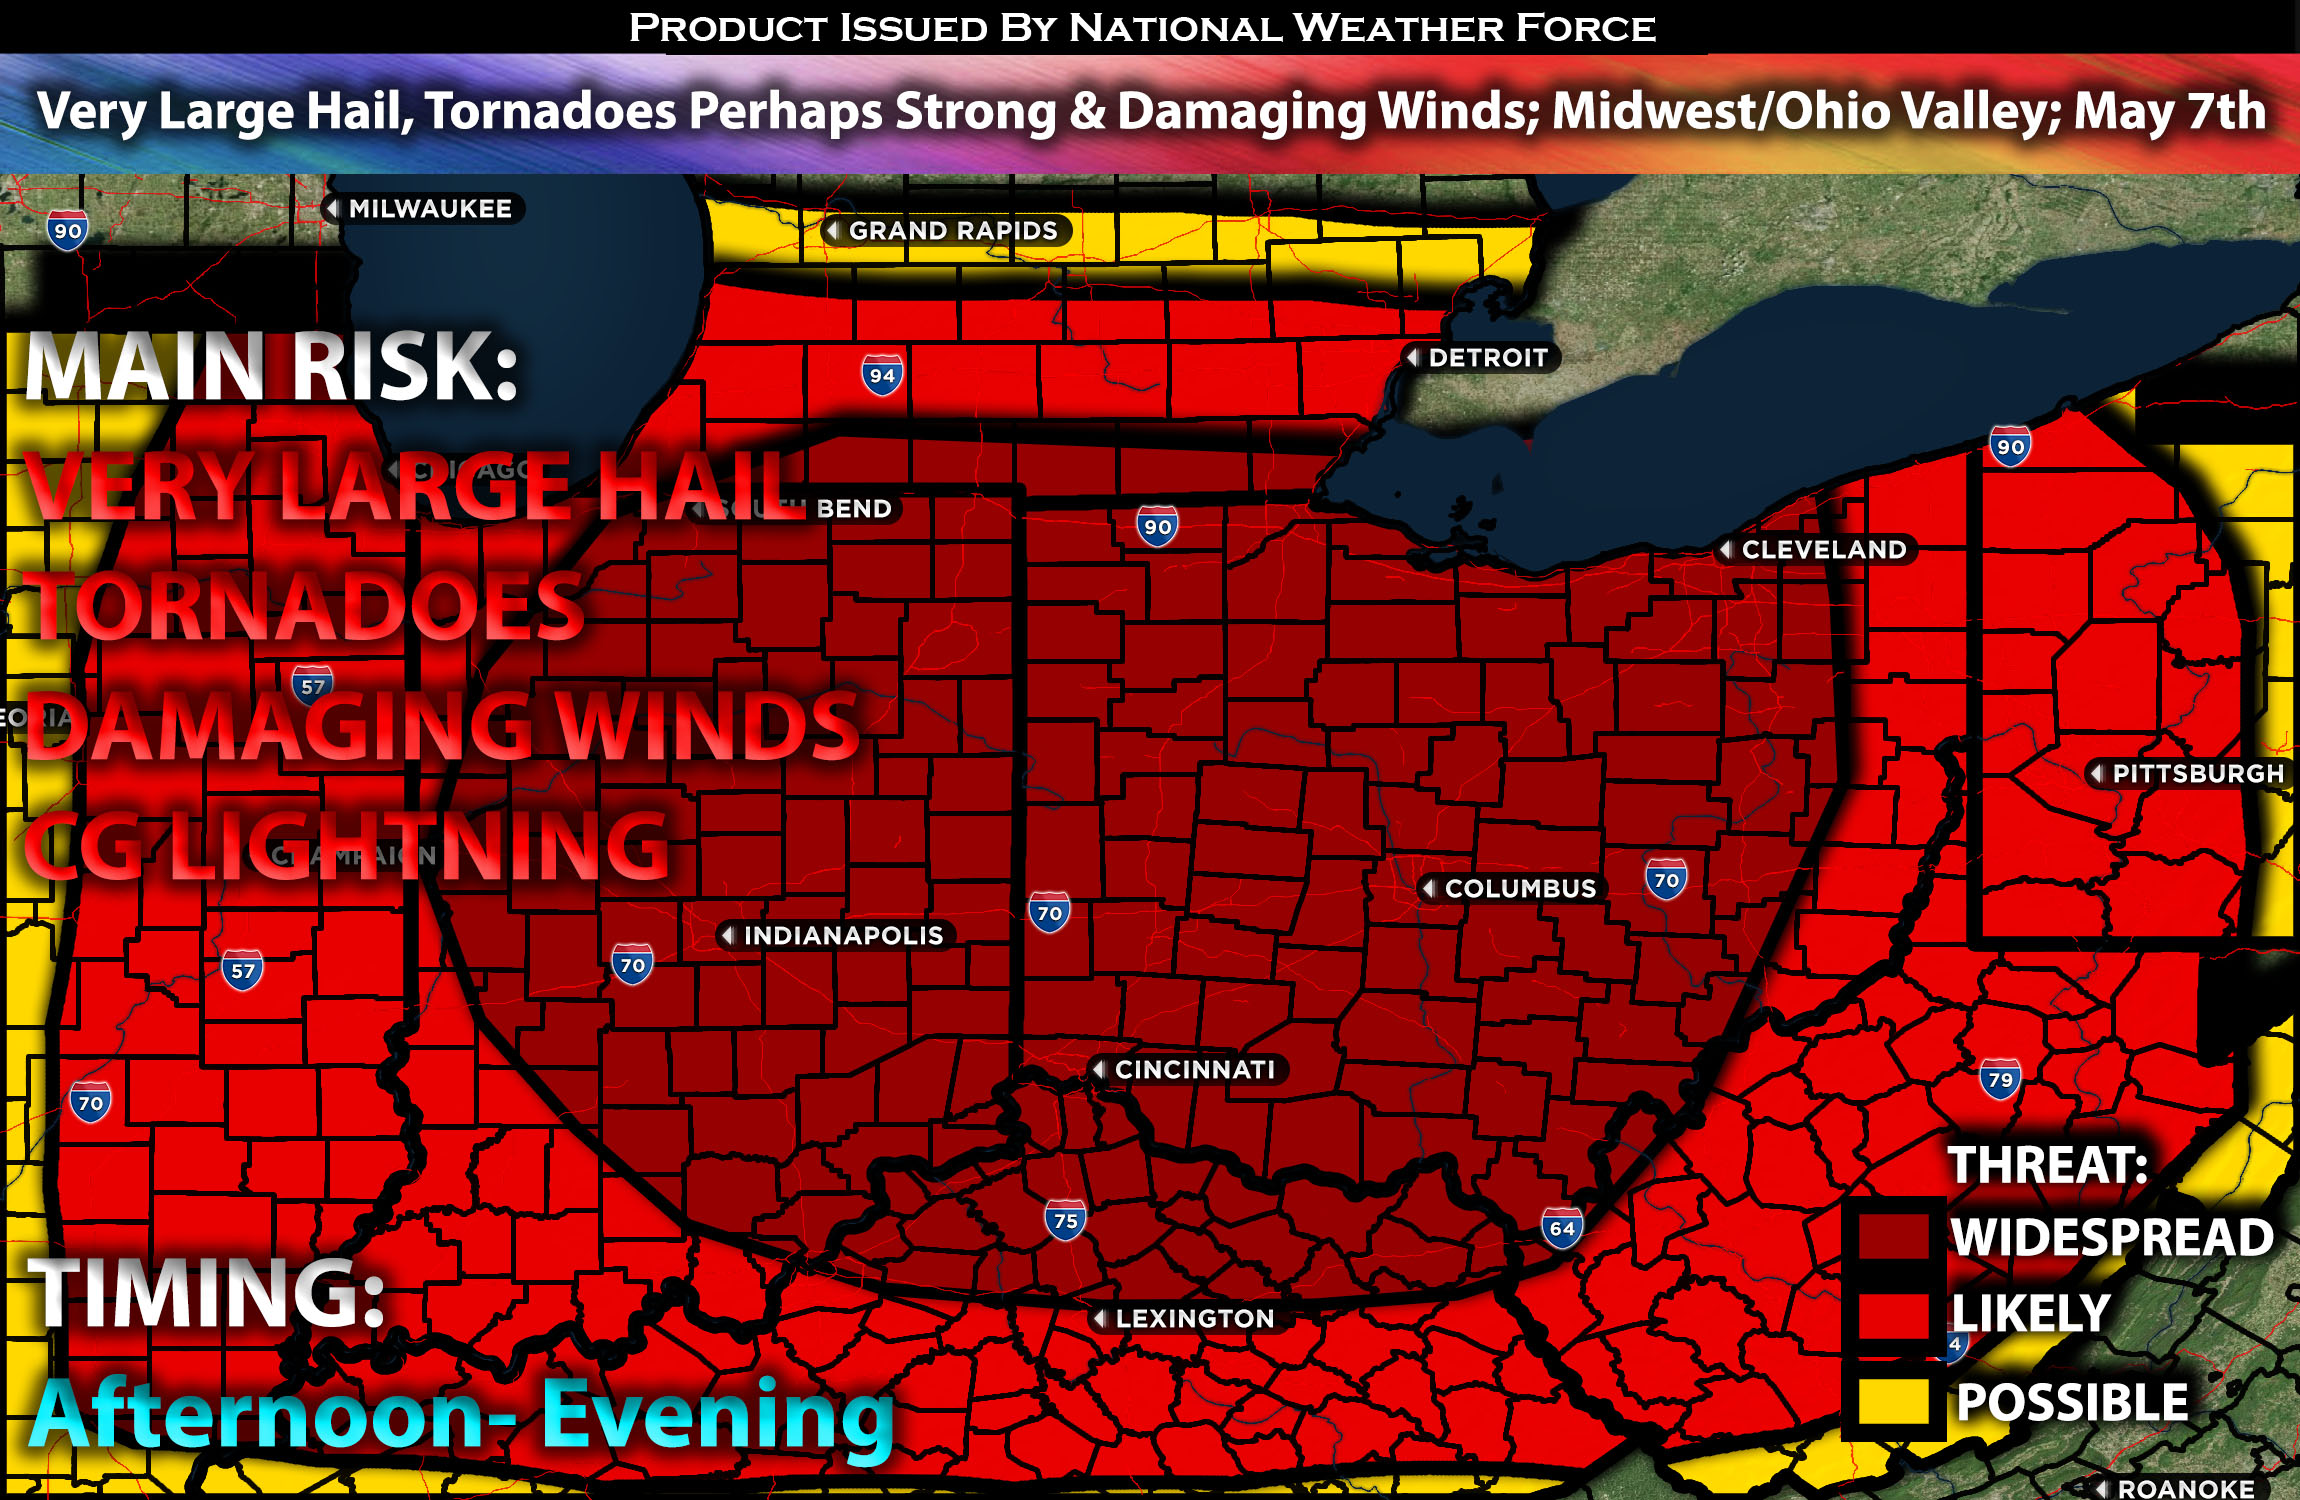 Very Large Hail, Tornadoes Perhaps Strong & Damaging Winds; Midwest/Ohio Valley; May 7th